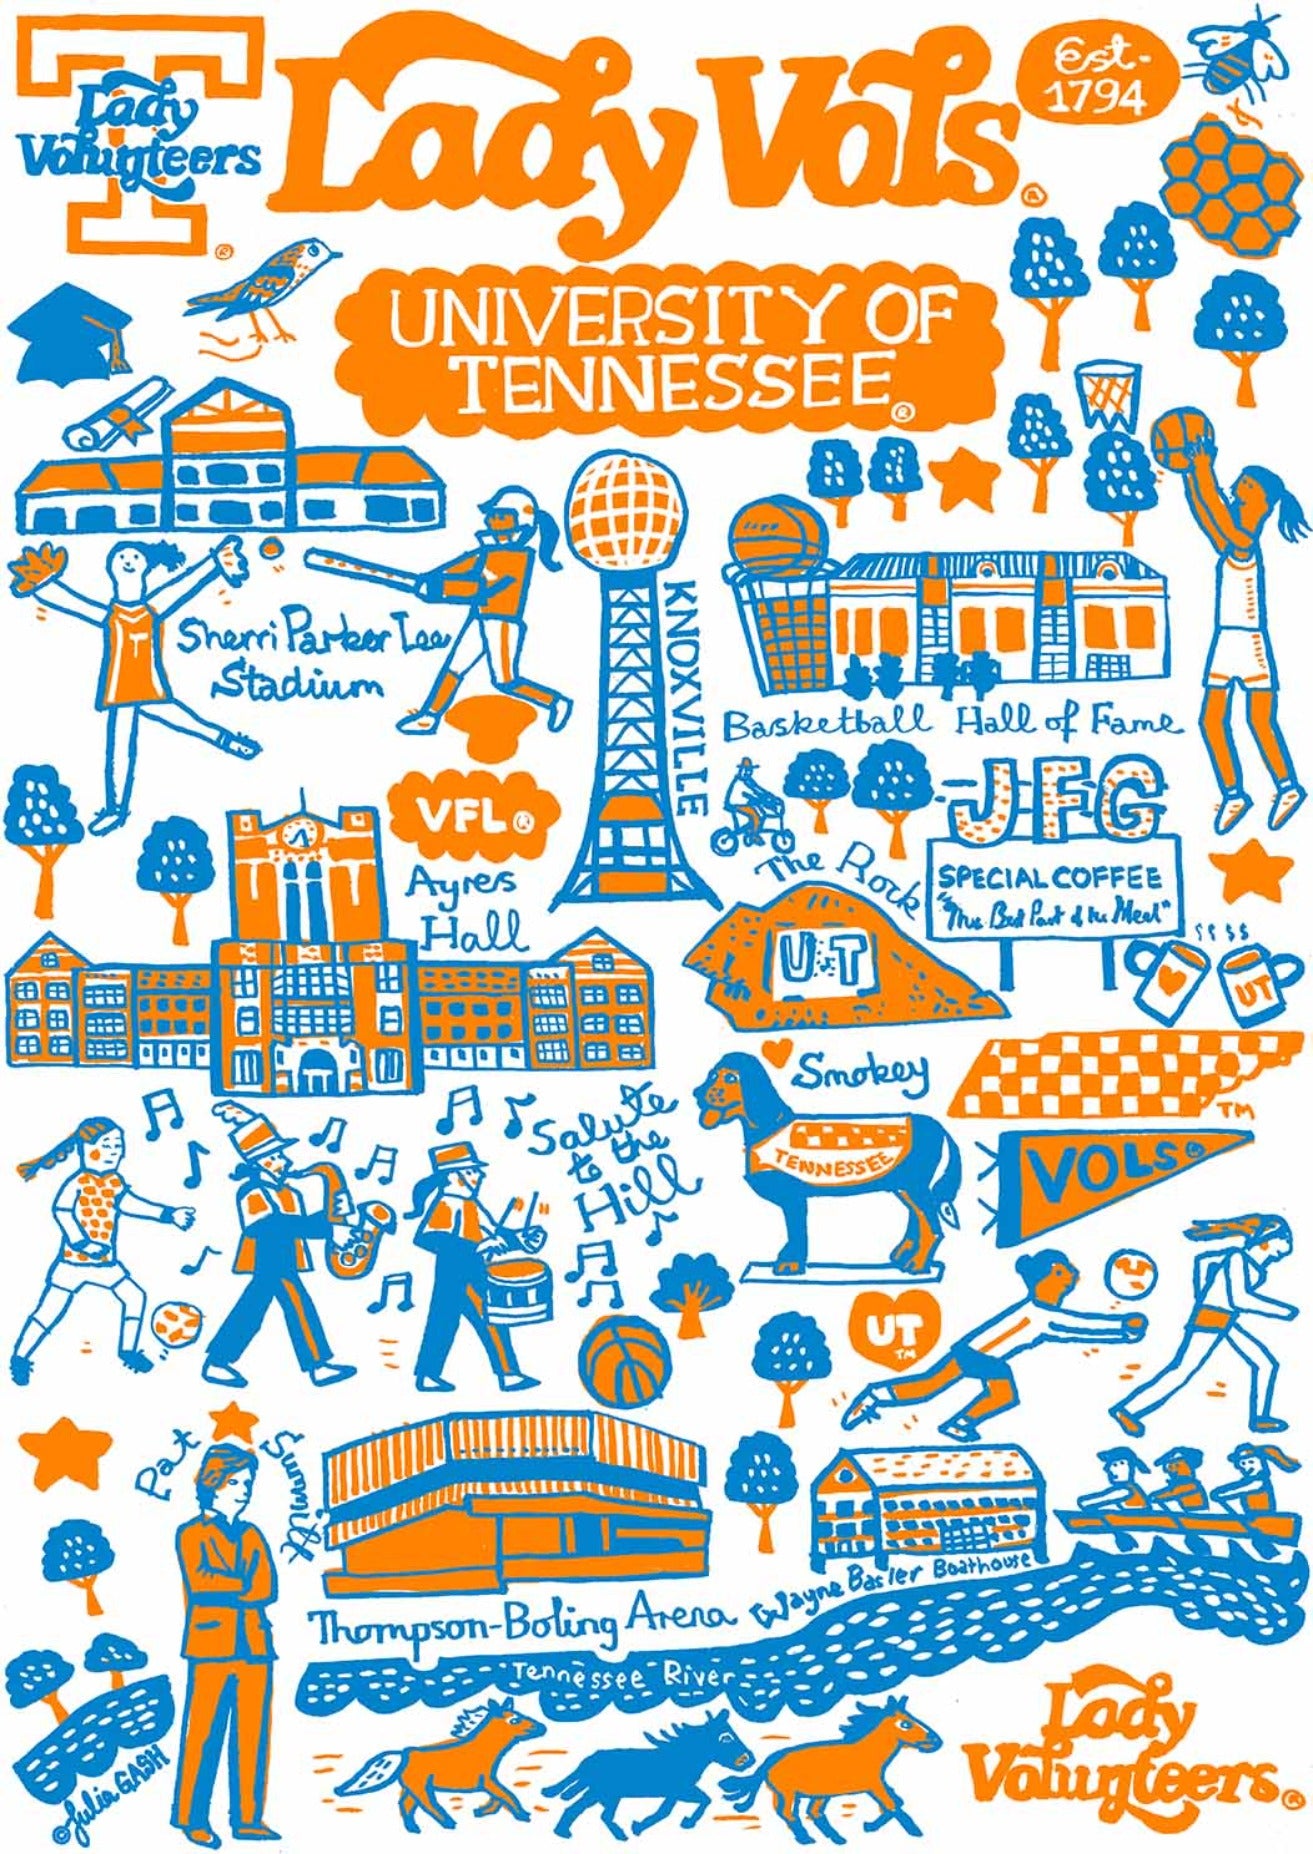 University of Tennessee - Lady Vols by Julia Gash